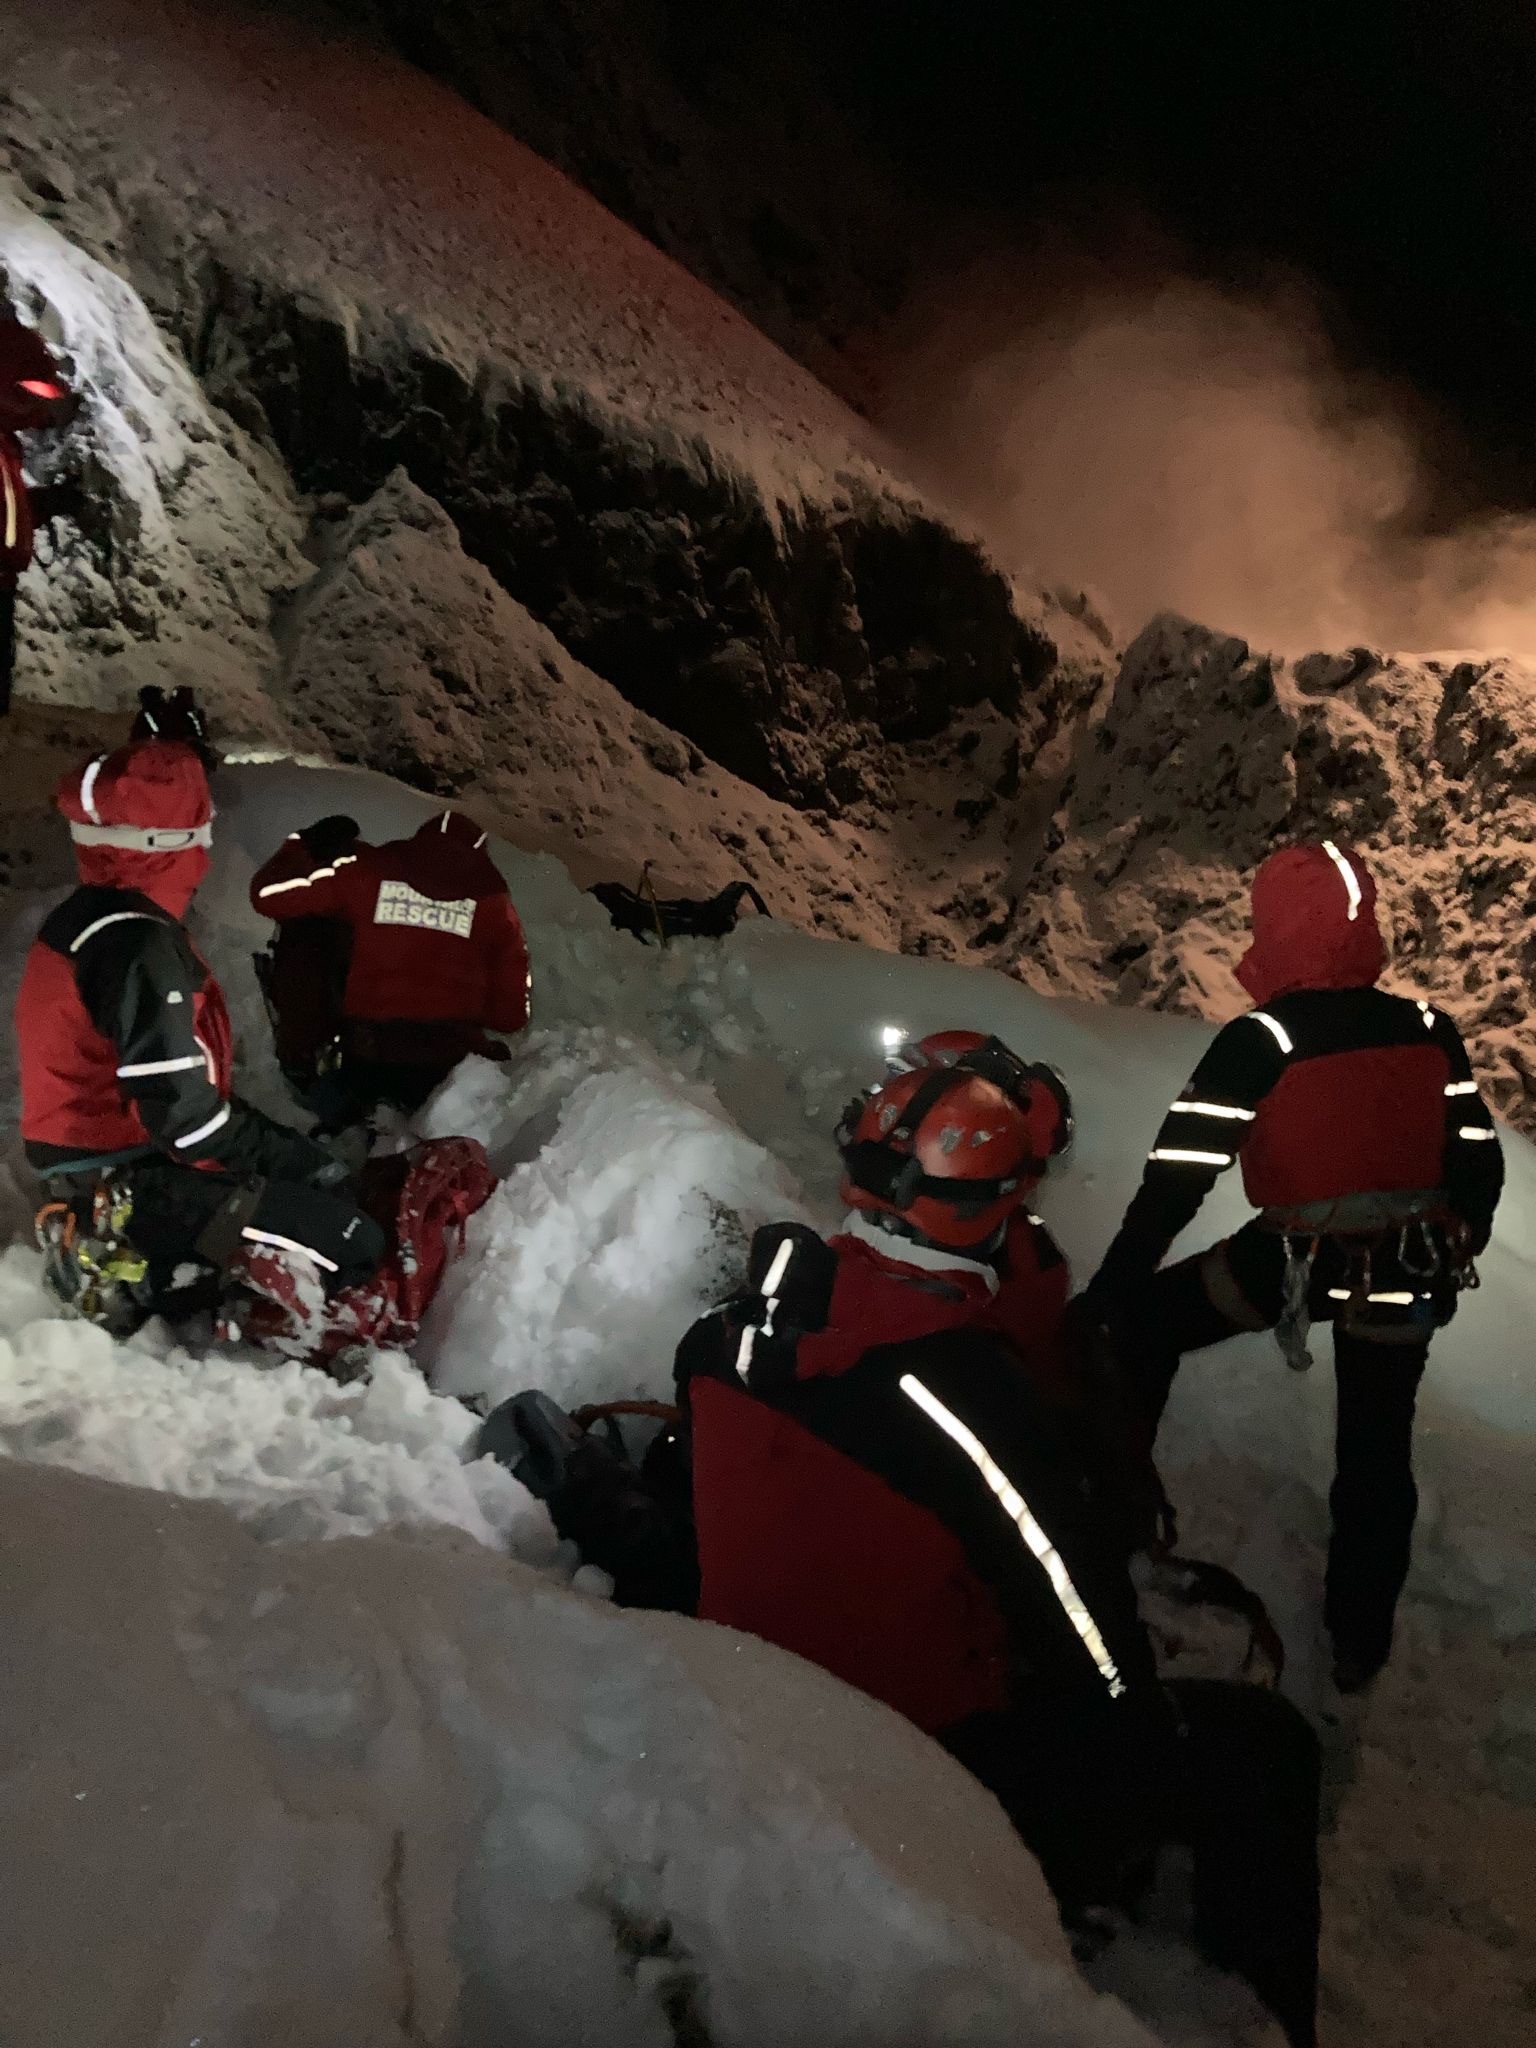 The Mountain Rescue team working at night